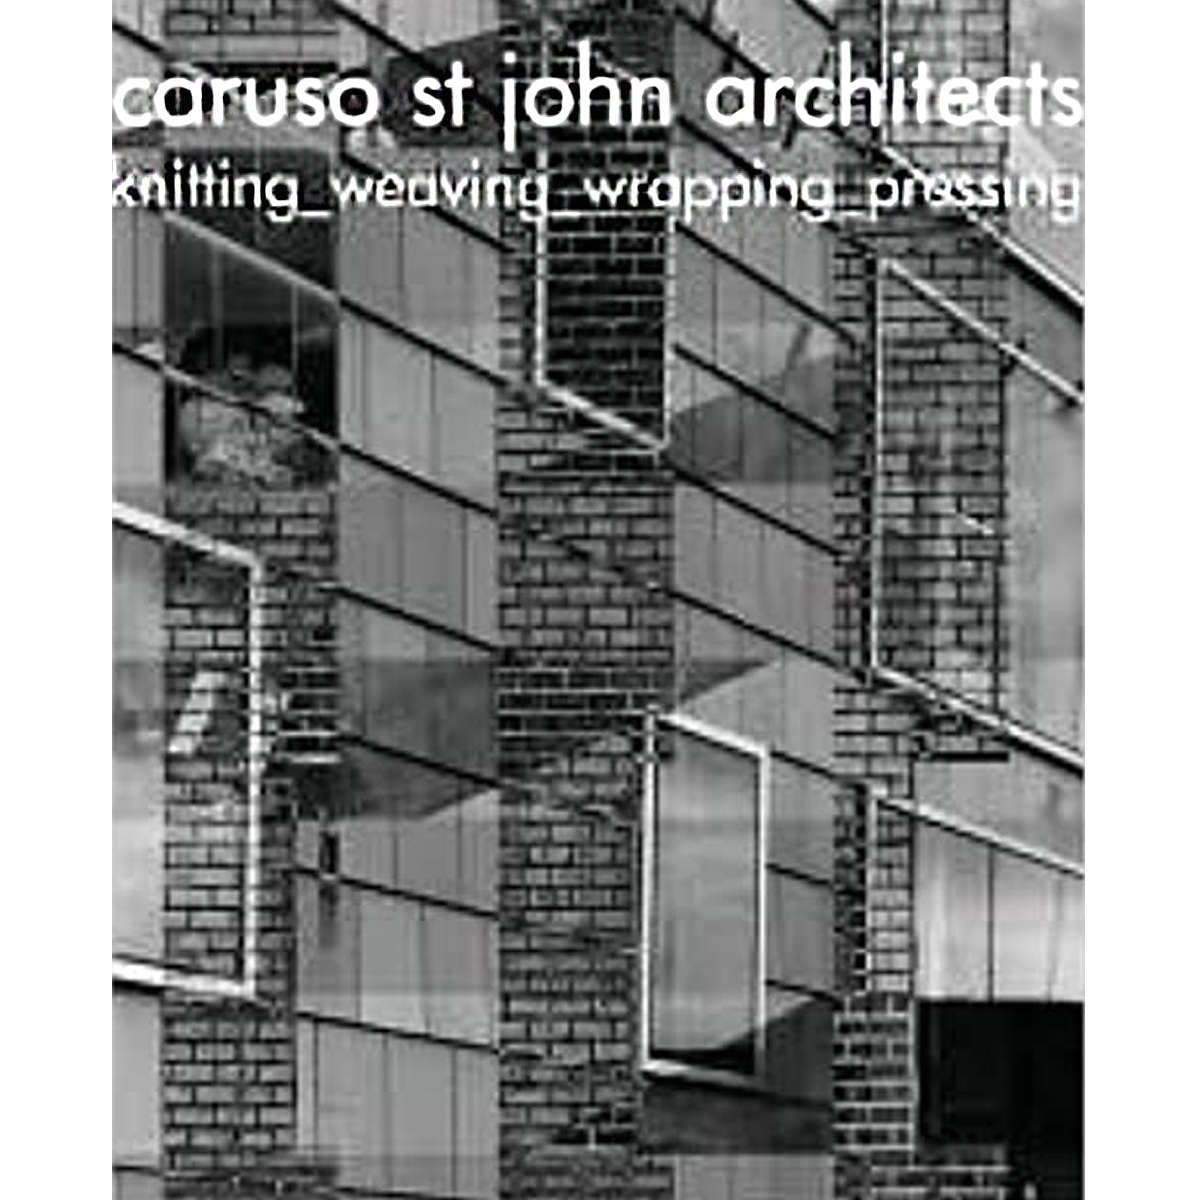 Caruso St. JohnArchitects